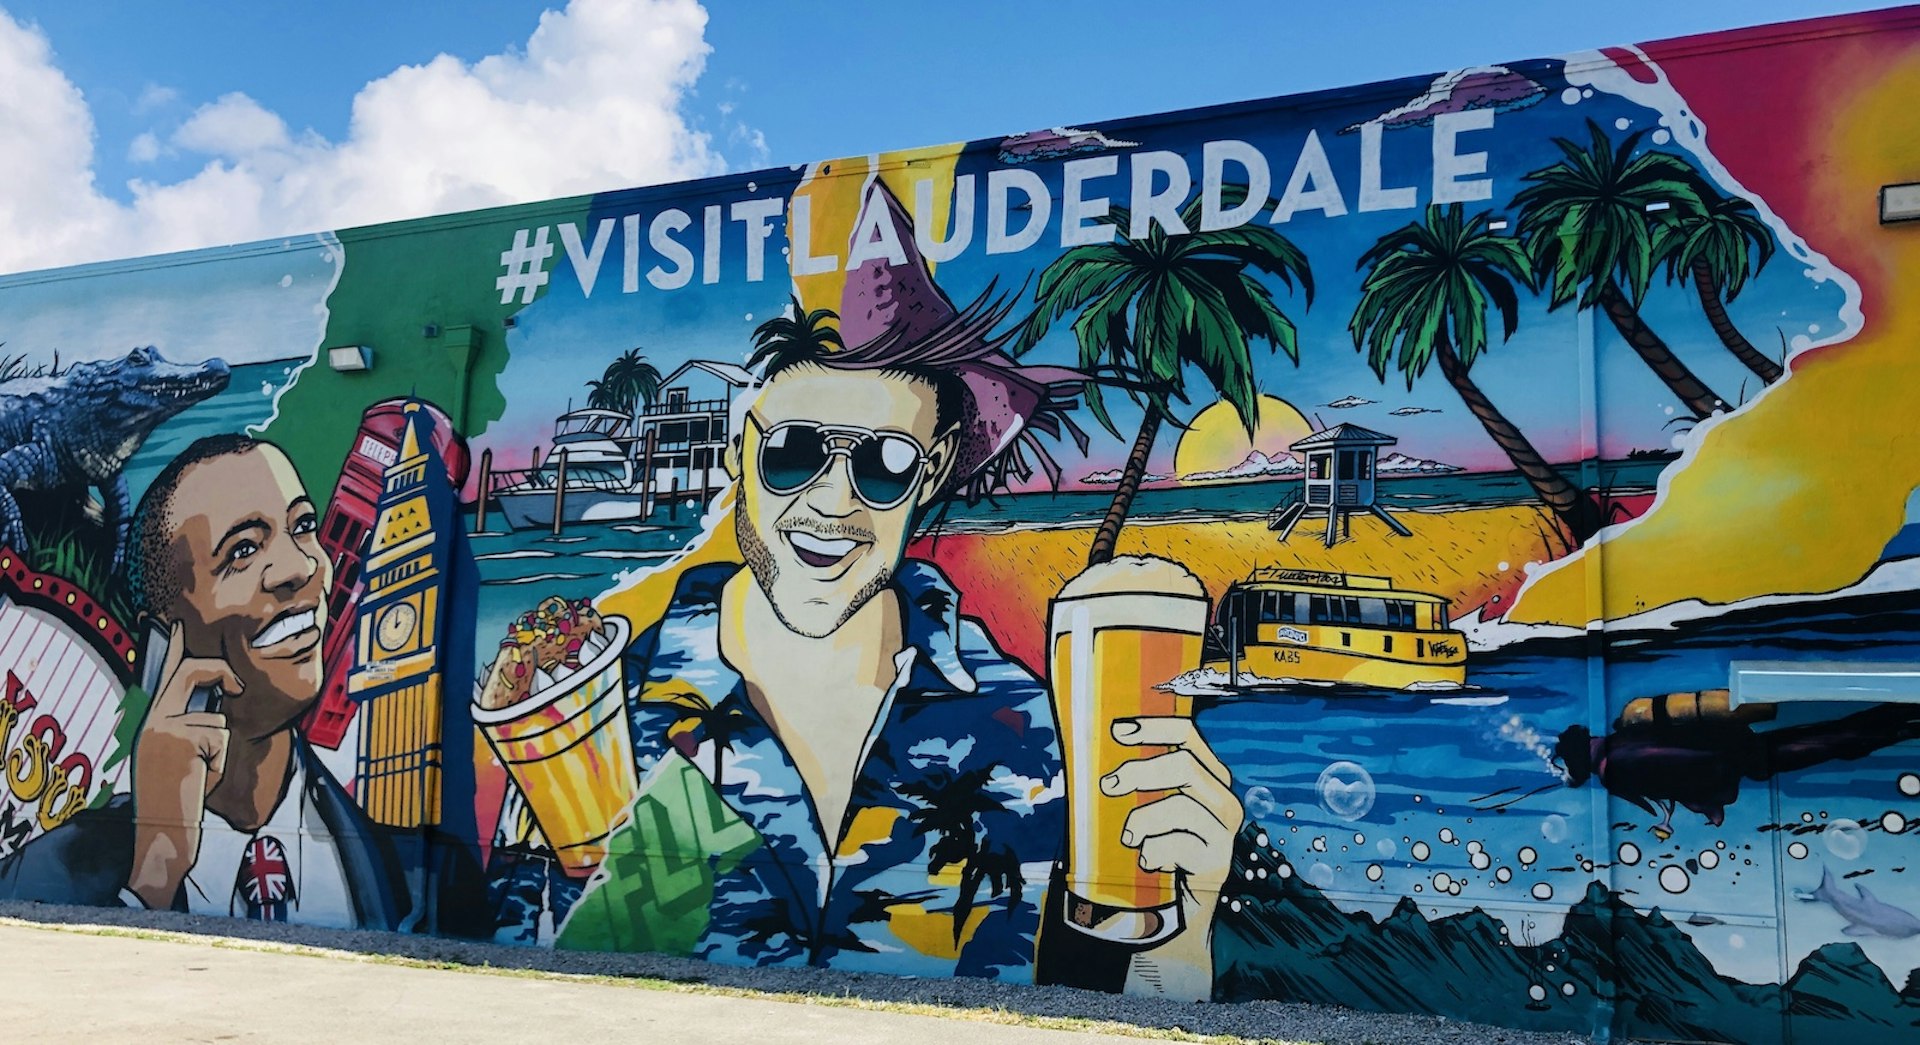 A colorful mural adorns a large wall. It depicts a man with a British flag tie with Big Ben next to him on the left and a man in a Hawaiian shirt and holding a beer is in the centre of the image. Various other images of Fort Lauderdale are included.